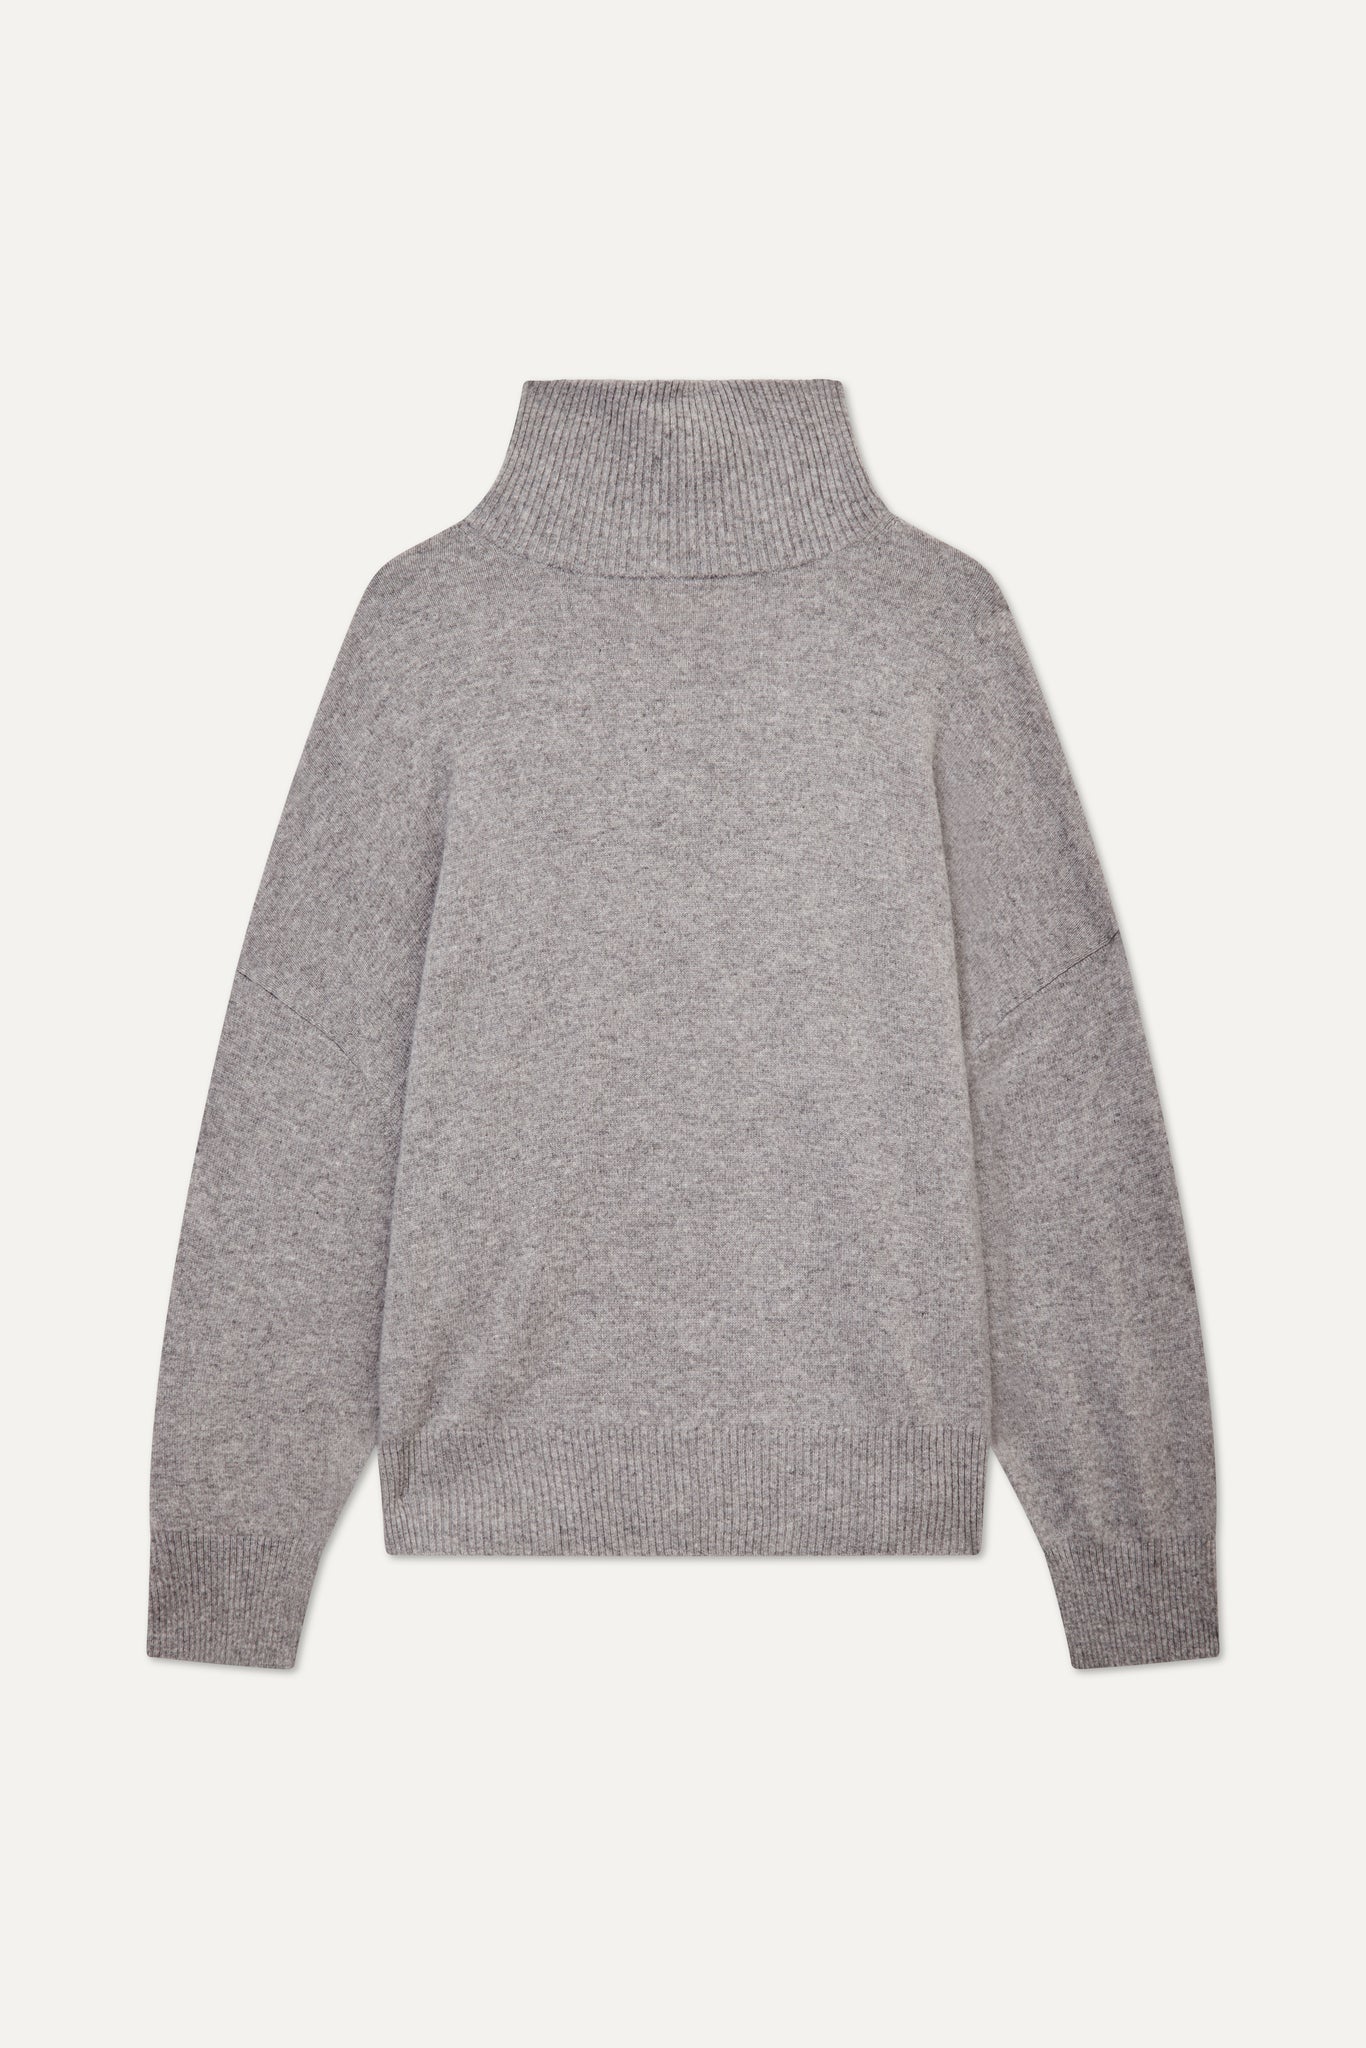 MURANO TURTLENECK CASHMERE SWEATER IN GREY BY LOULOU STUDIO - BEYOND STUDIOS